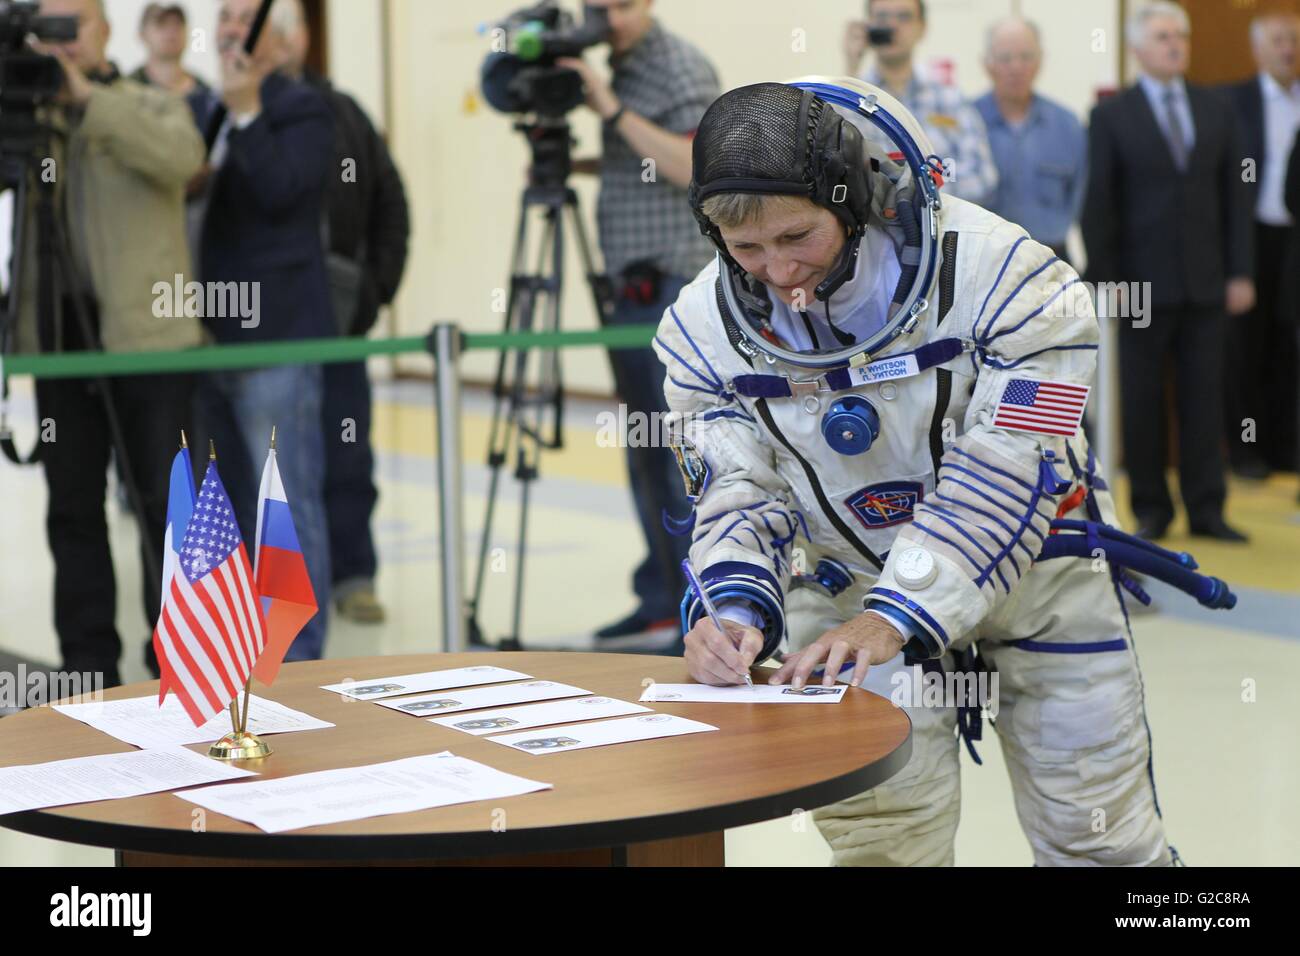 International Space Station Expedition 48 backup crew member NASA astronaut Peggy Whitson signs in for the Soyuz qualification exams at the Gagarin Cosmonaut Training Center May 26, 2016 in Star City, Russia. Stock Photo